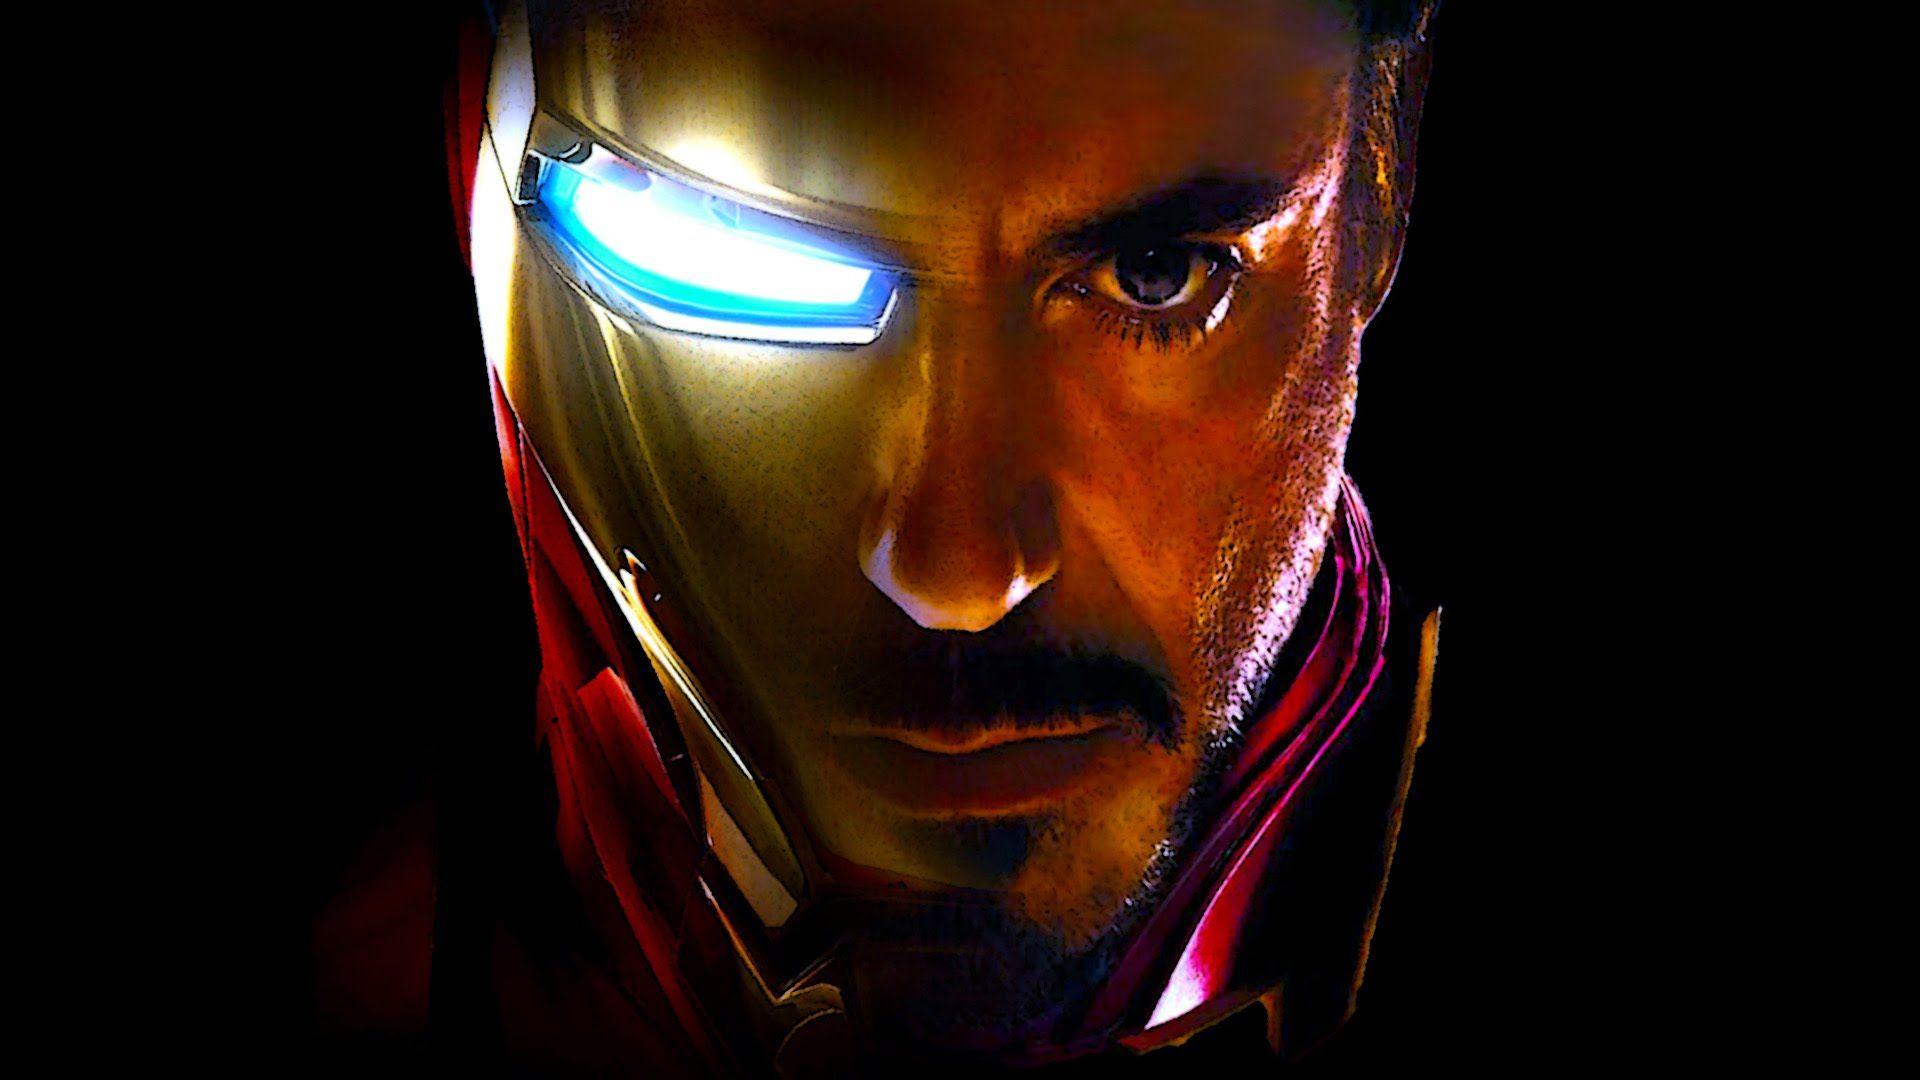 Desktop Wallpaper High Definition in 1080p with Iron Man Photo